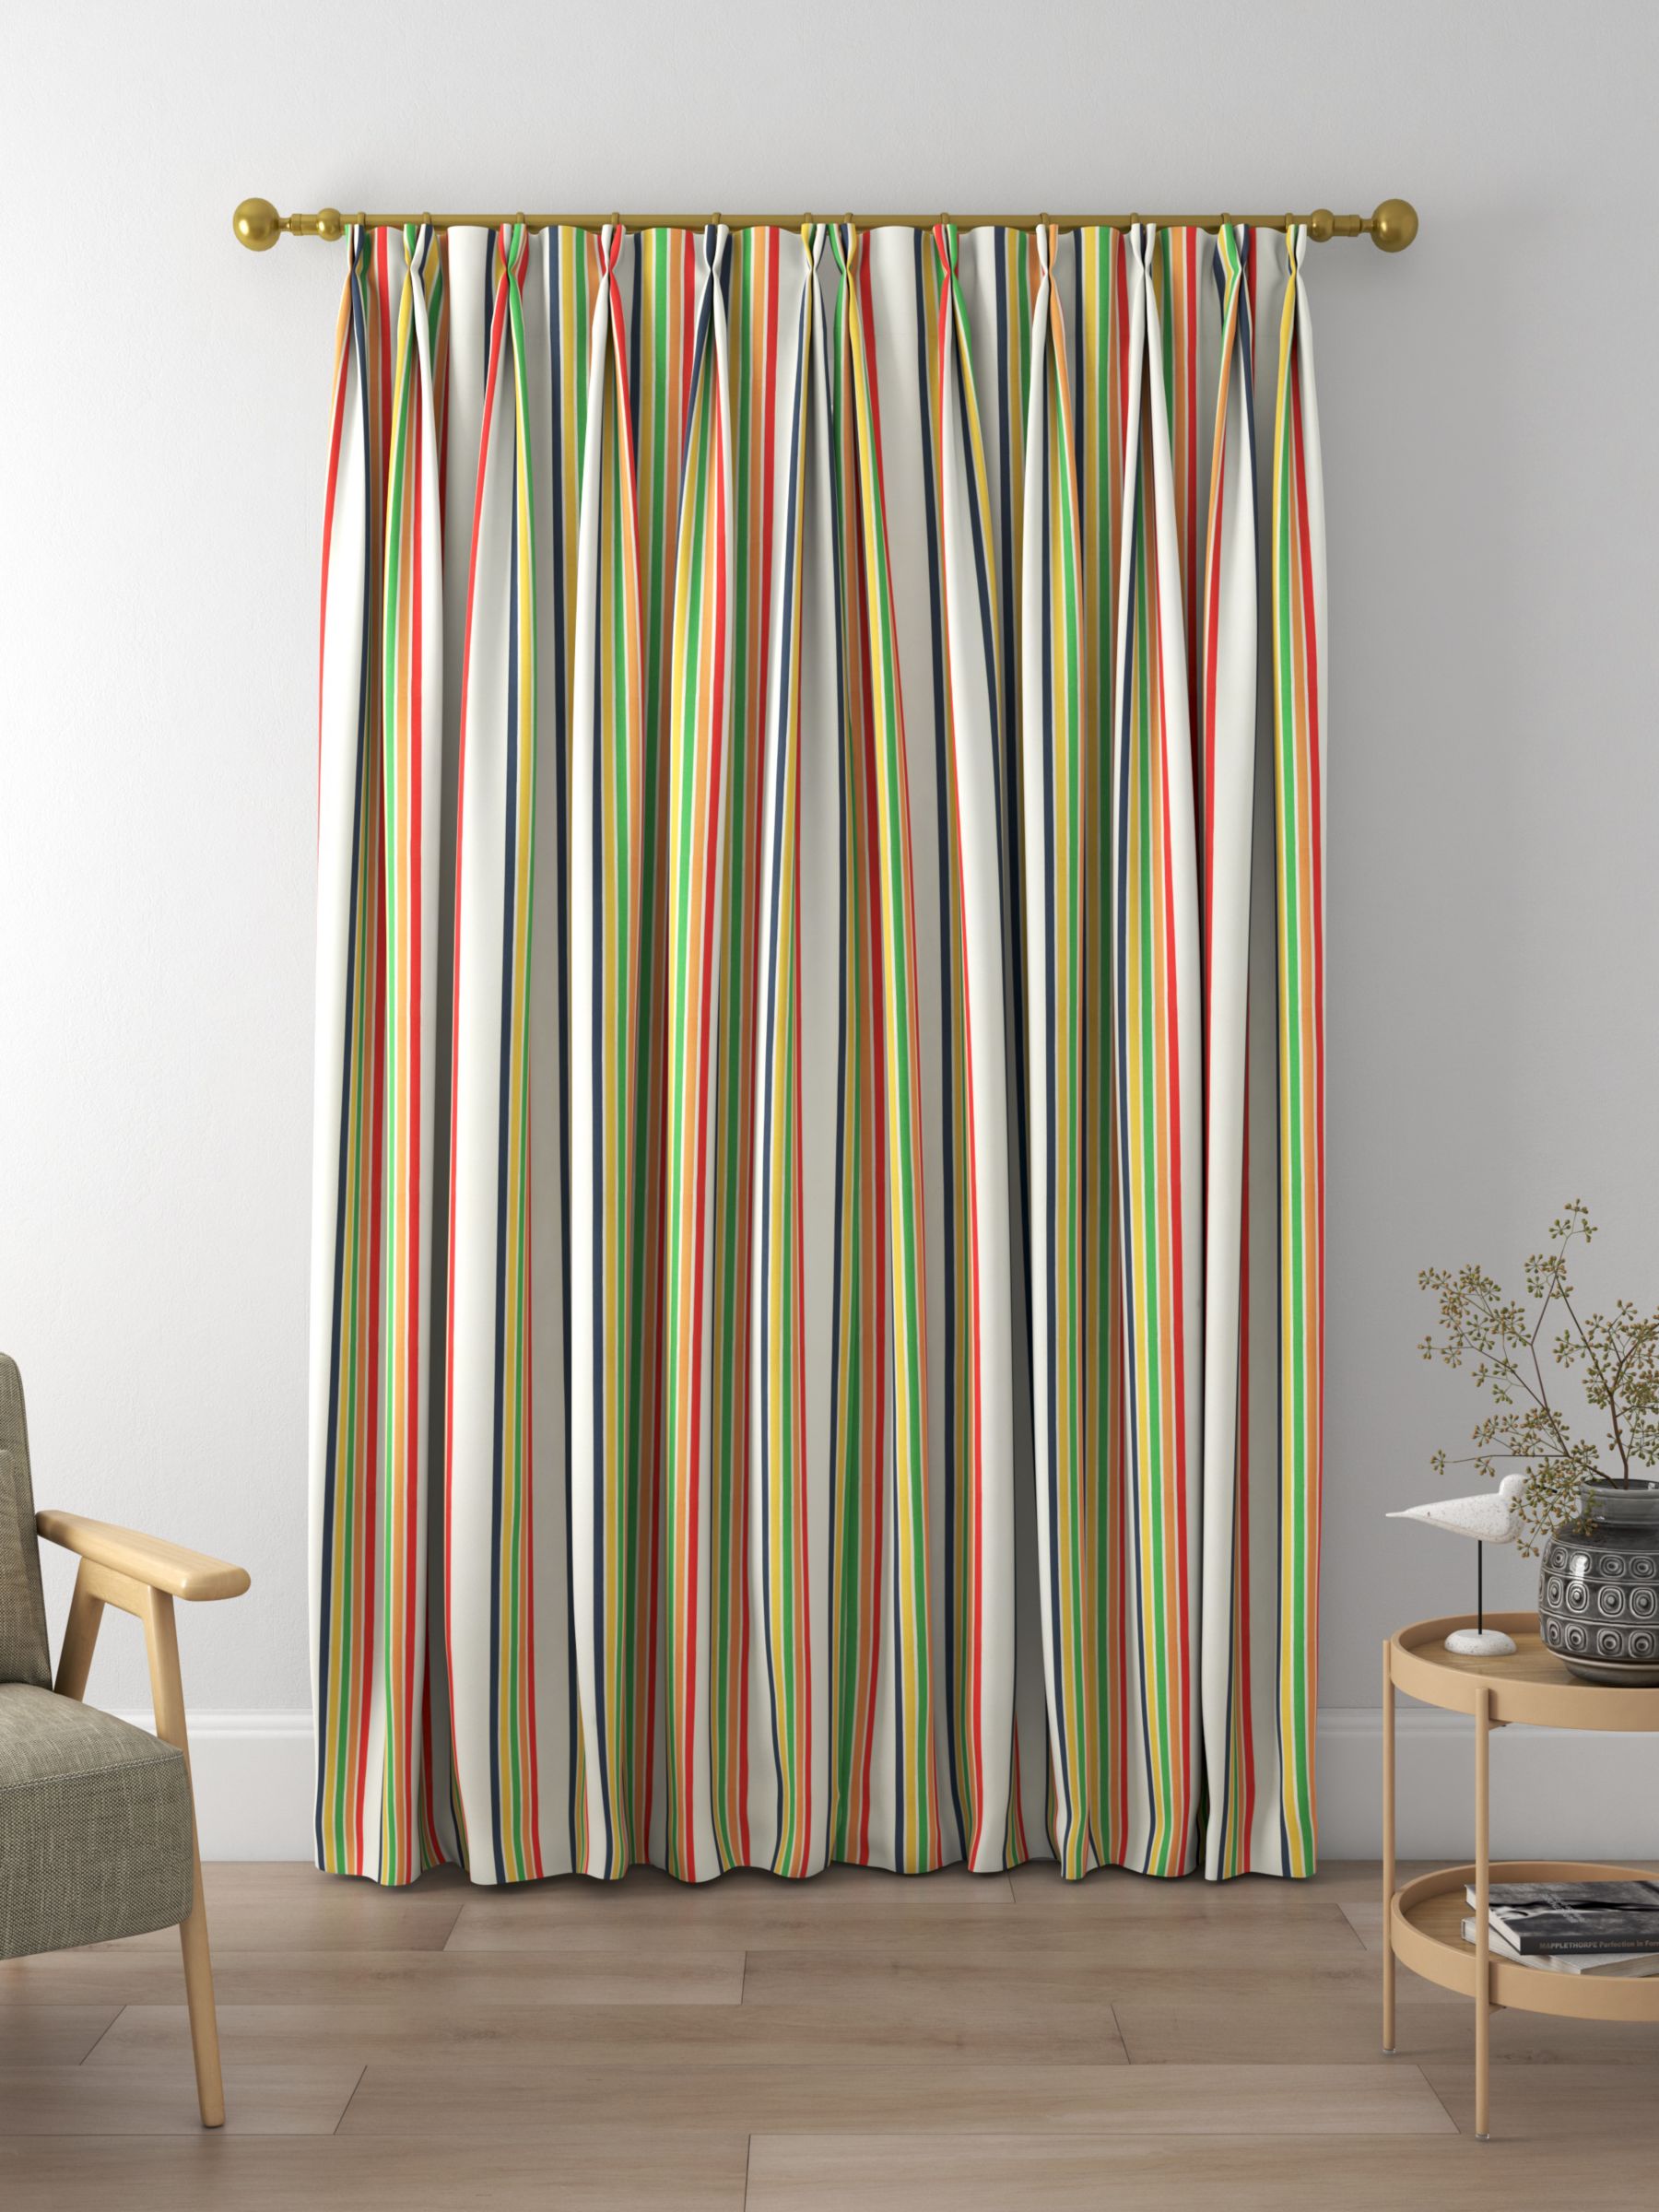 Harlequin Helter Skelter Stripe Made to Measure Curtains and Roman Blind, Navy/Poppy/Apricot